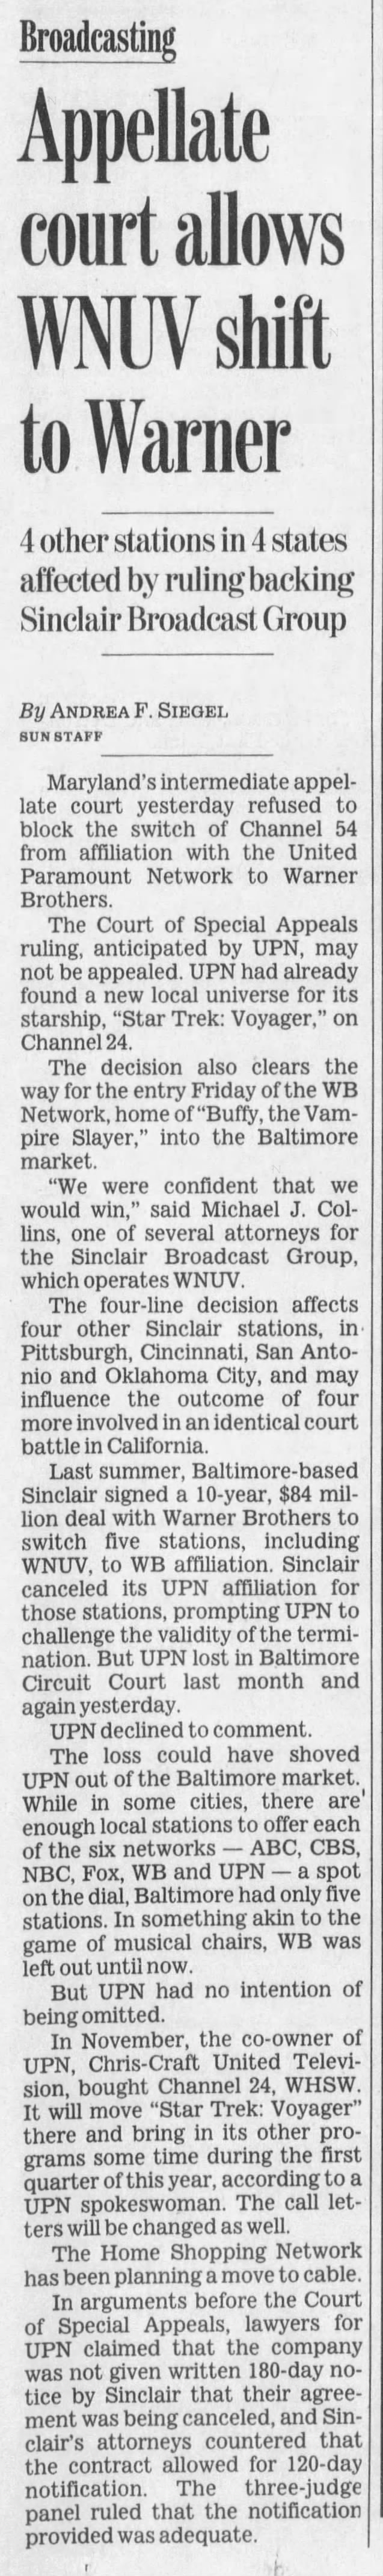 Appellate court allows WNUV shift to Warner